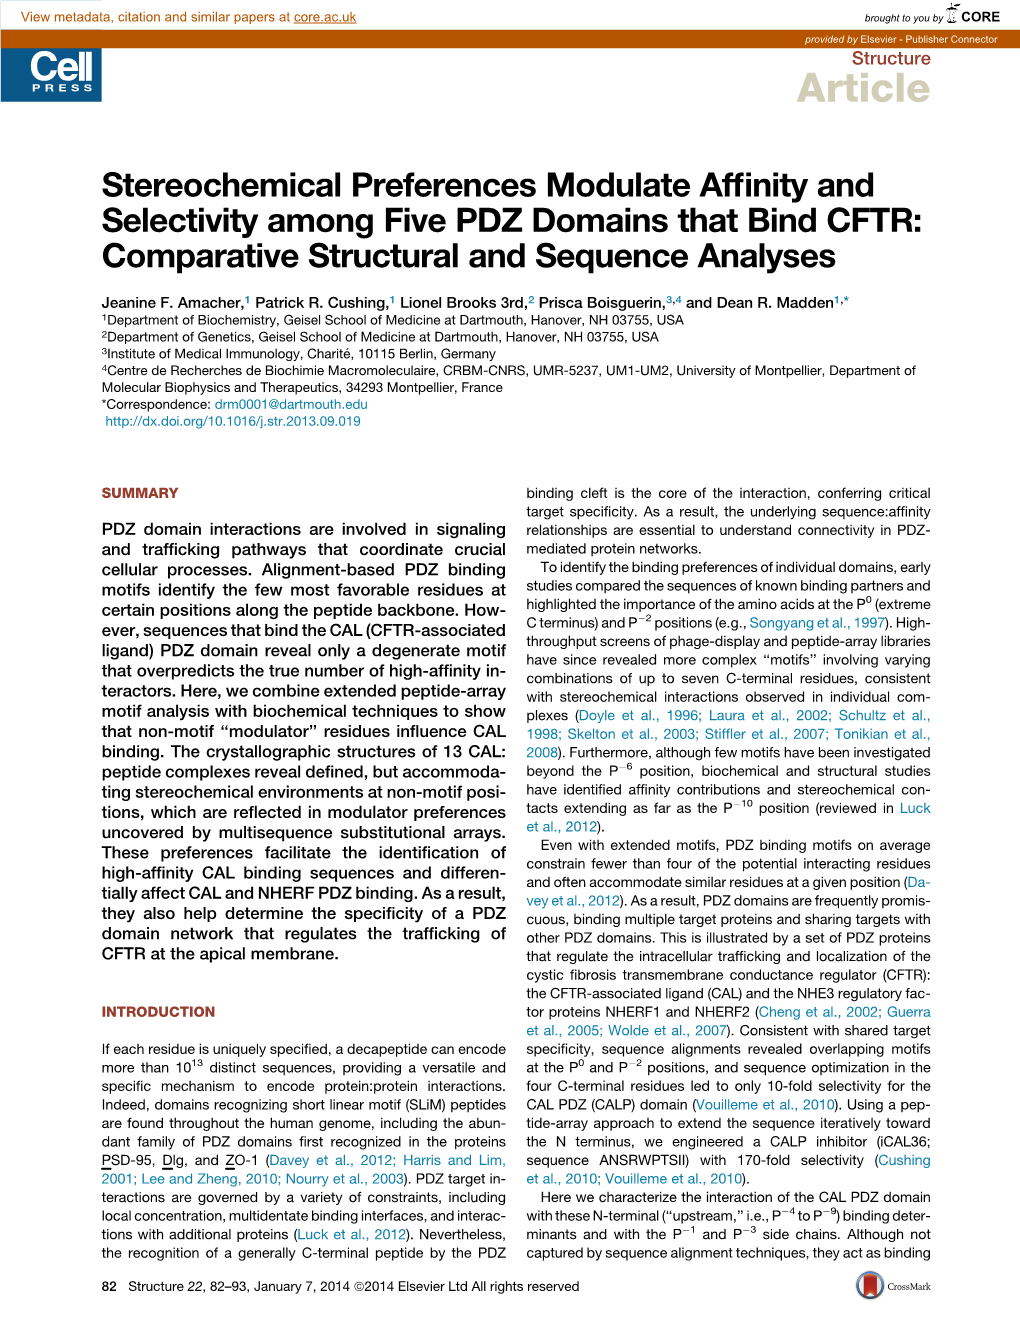 Stereochemical Preferences Modulate Affinity and Selectivity